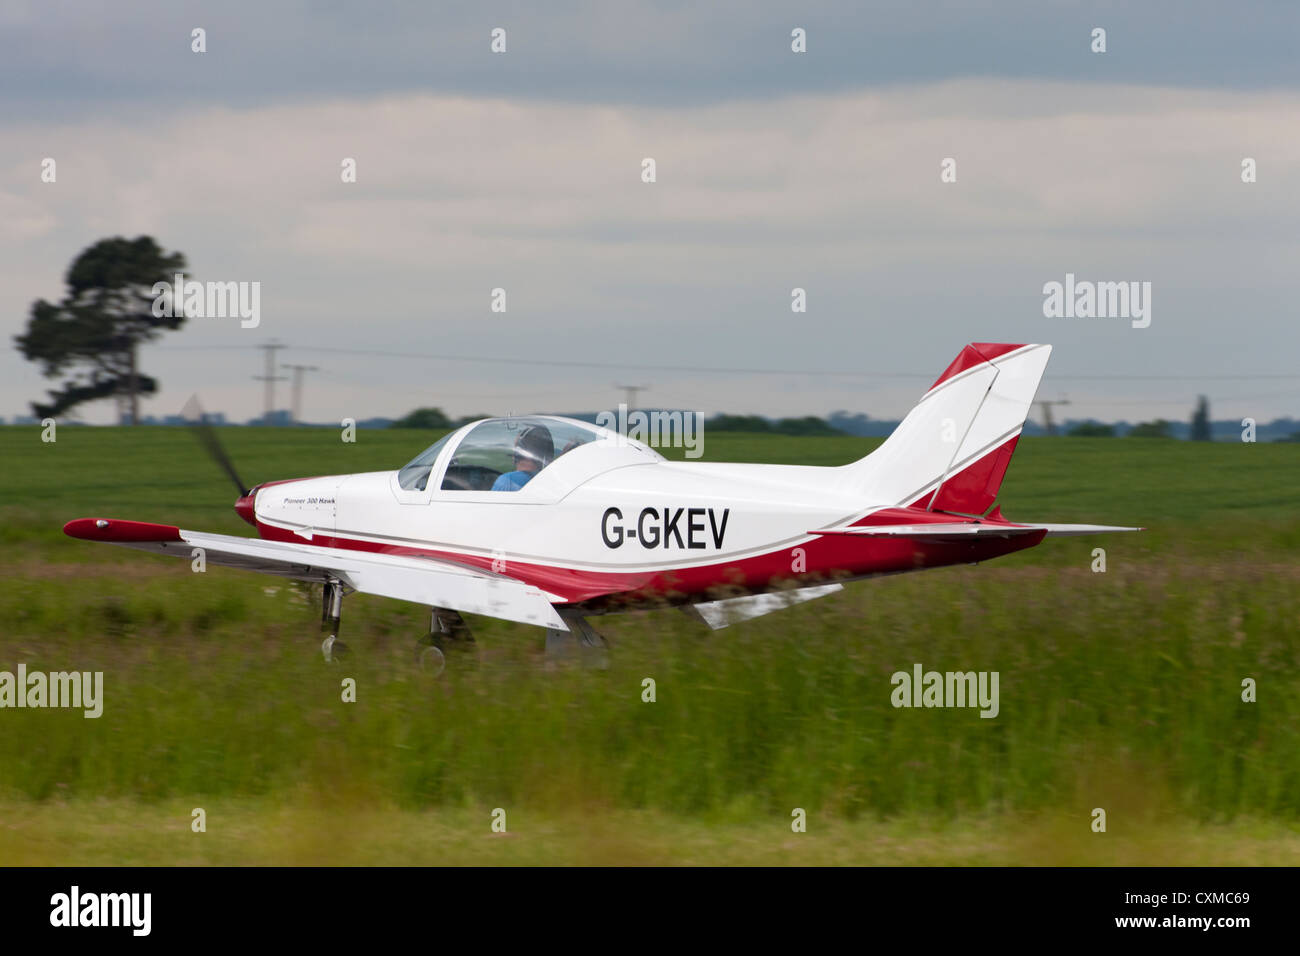 Pioneer 300 Hawk G-GKEV taxing along runway with flaps down Stock Photo